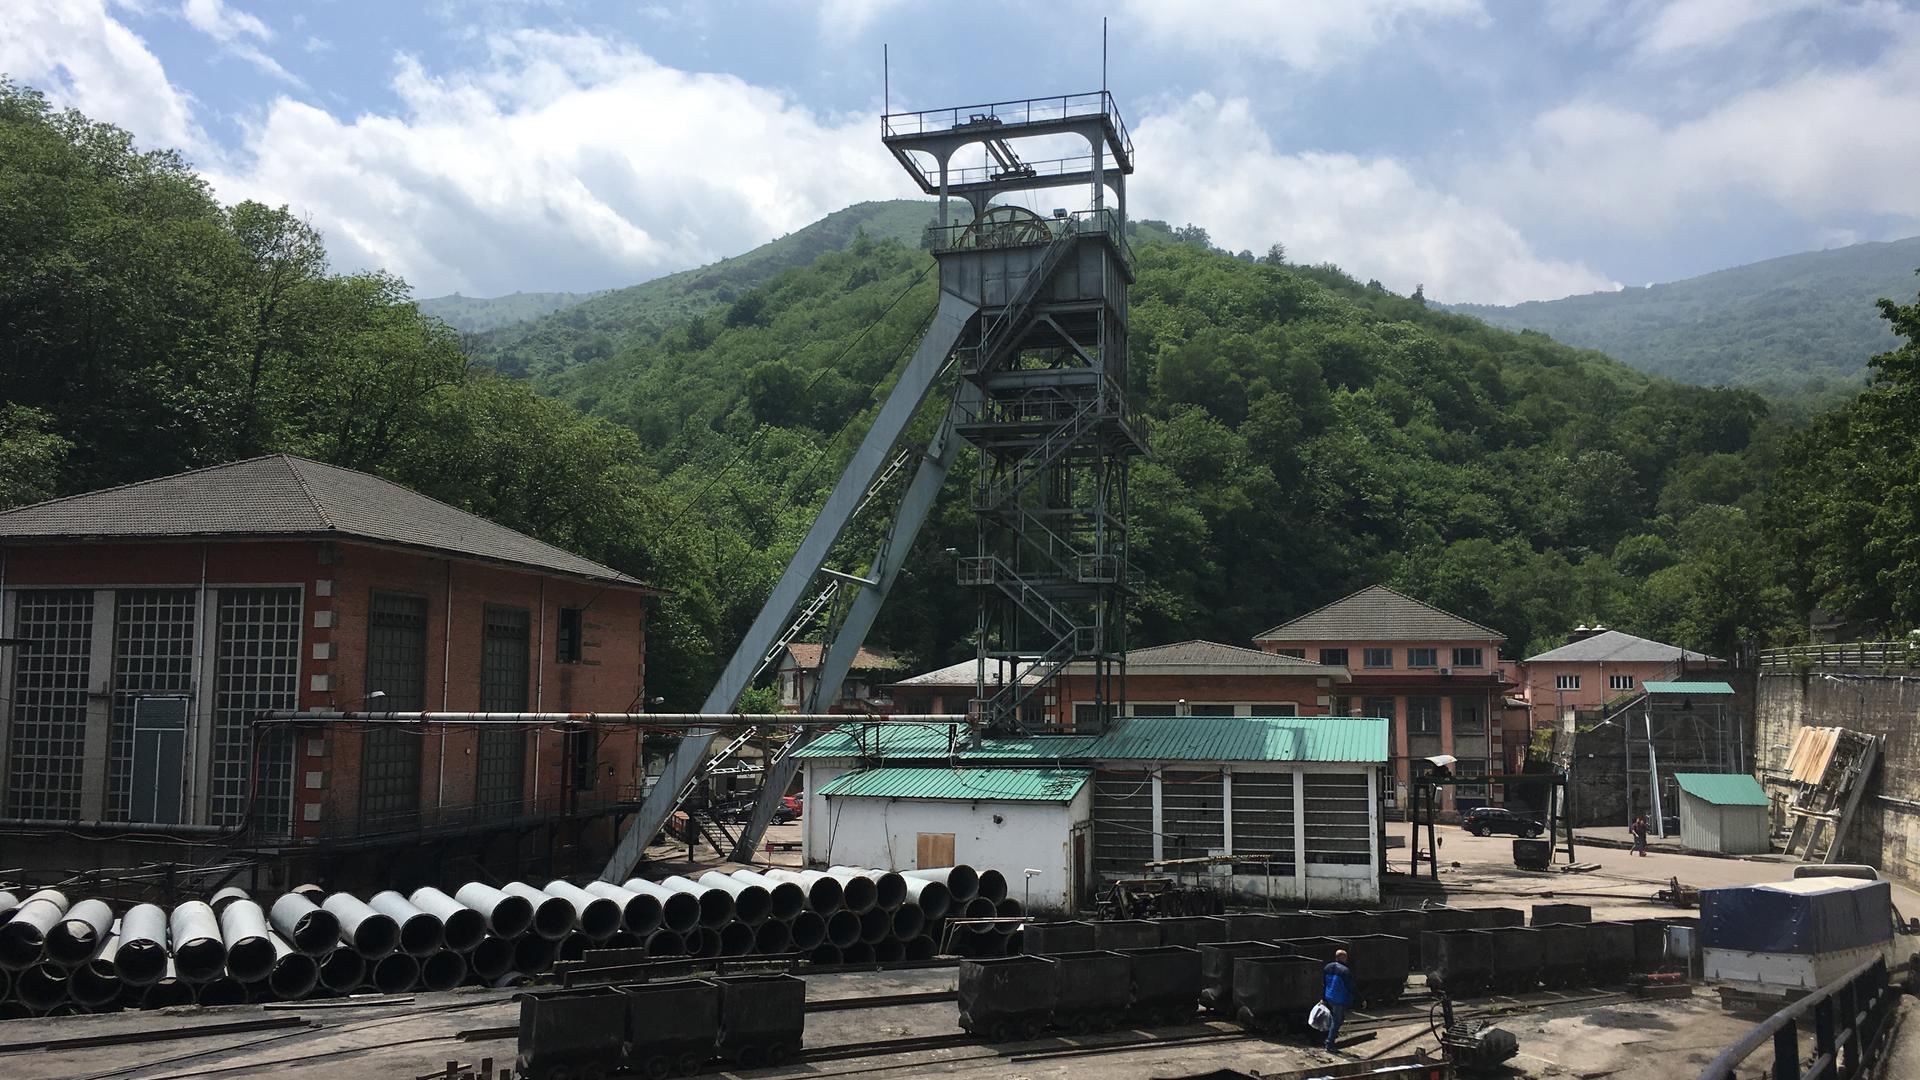 The San Nicolas mine in Spain's northern region of Asturias is the last working coalmine in all of Spain. At its peak, it employed around two thousand people — today, about two hundred people work there.